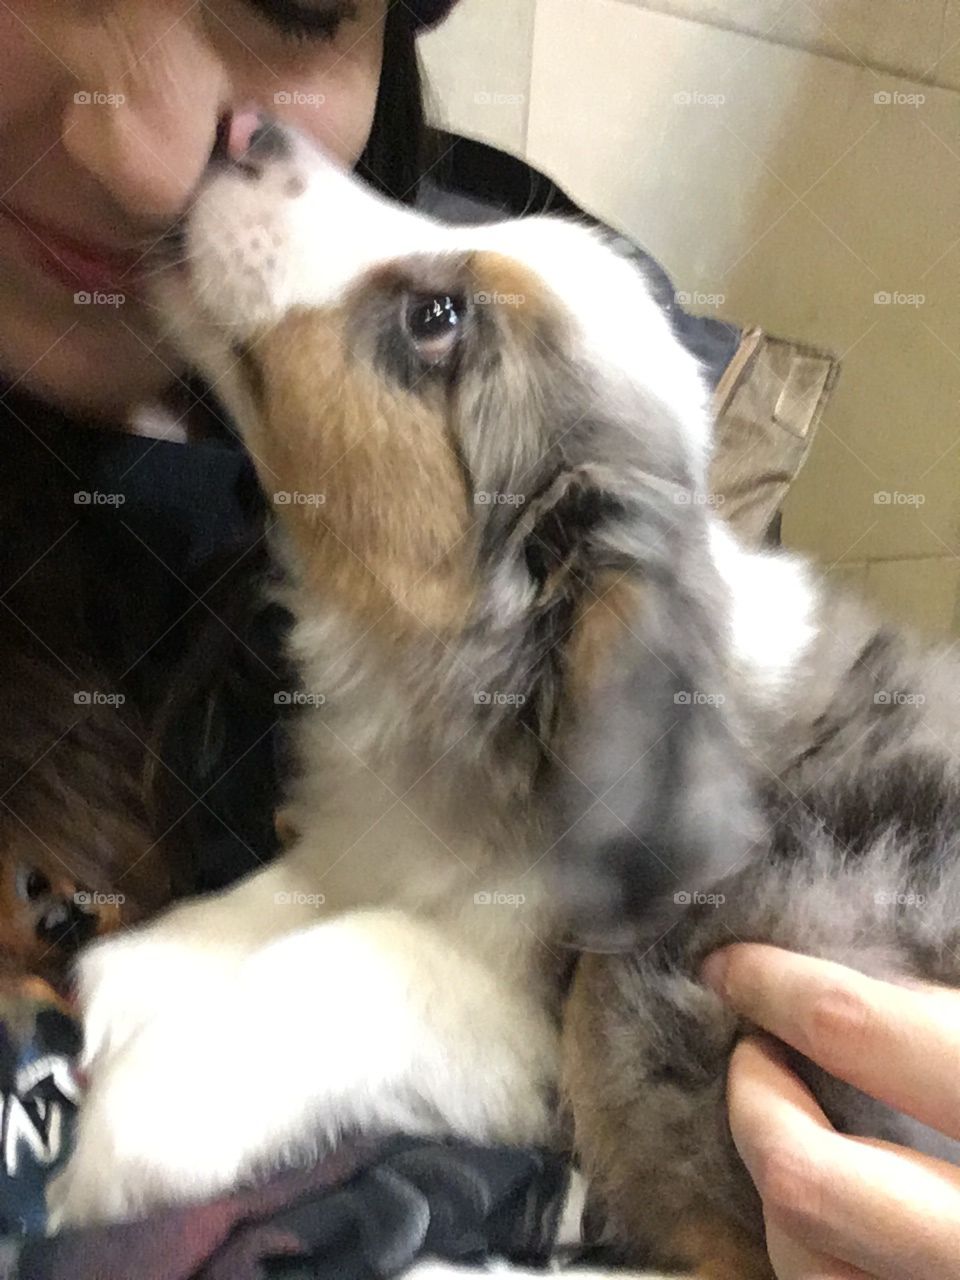 A puppy giving kisses on the nose